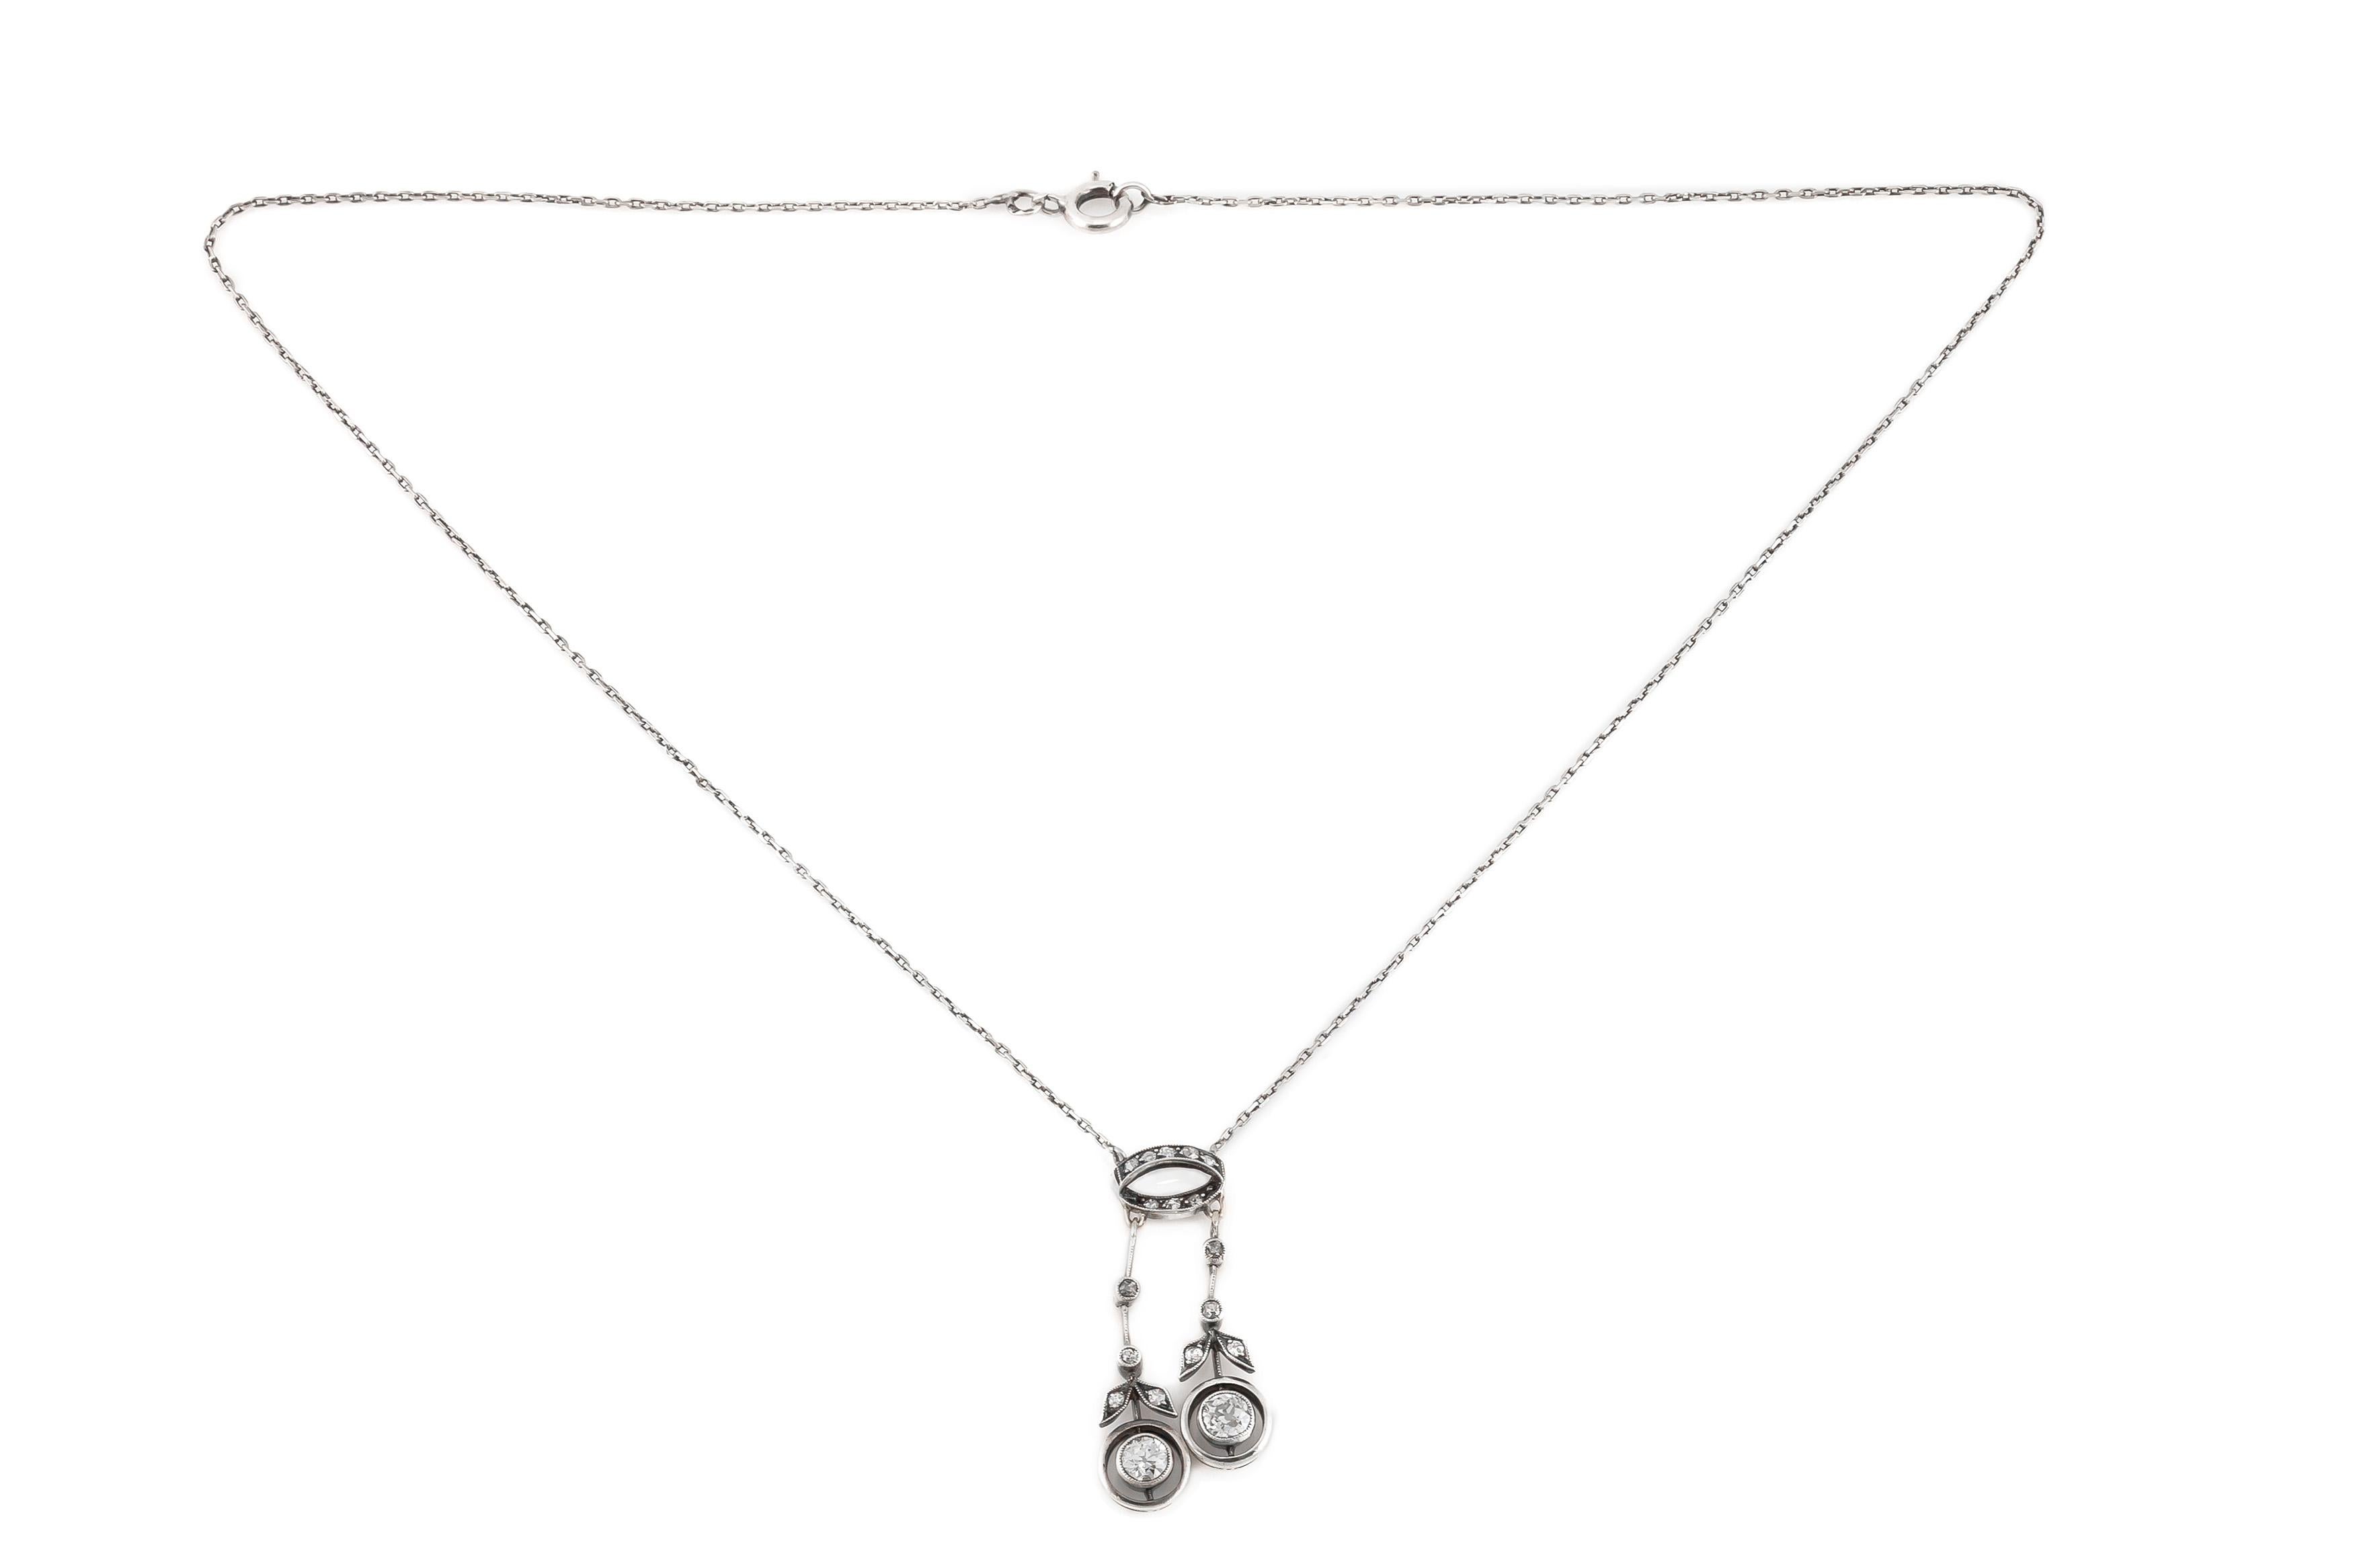 The necklace is finely crafted in platinum and 14k white gold with diamonds weighing approximately total of 1.10 carat.